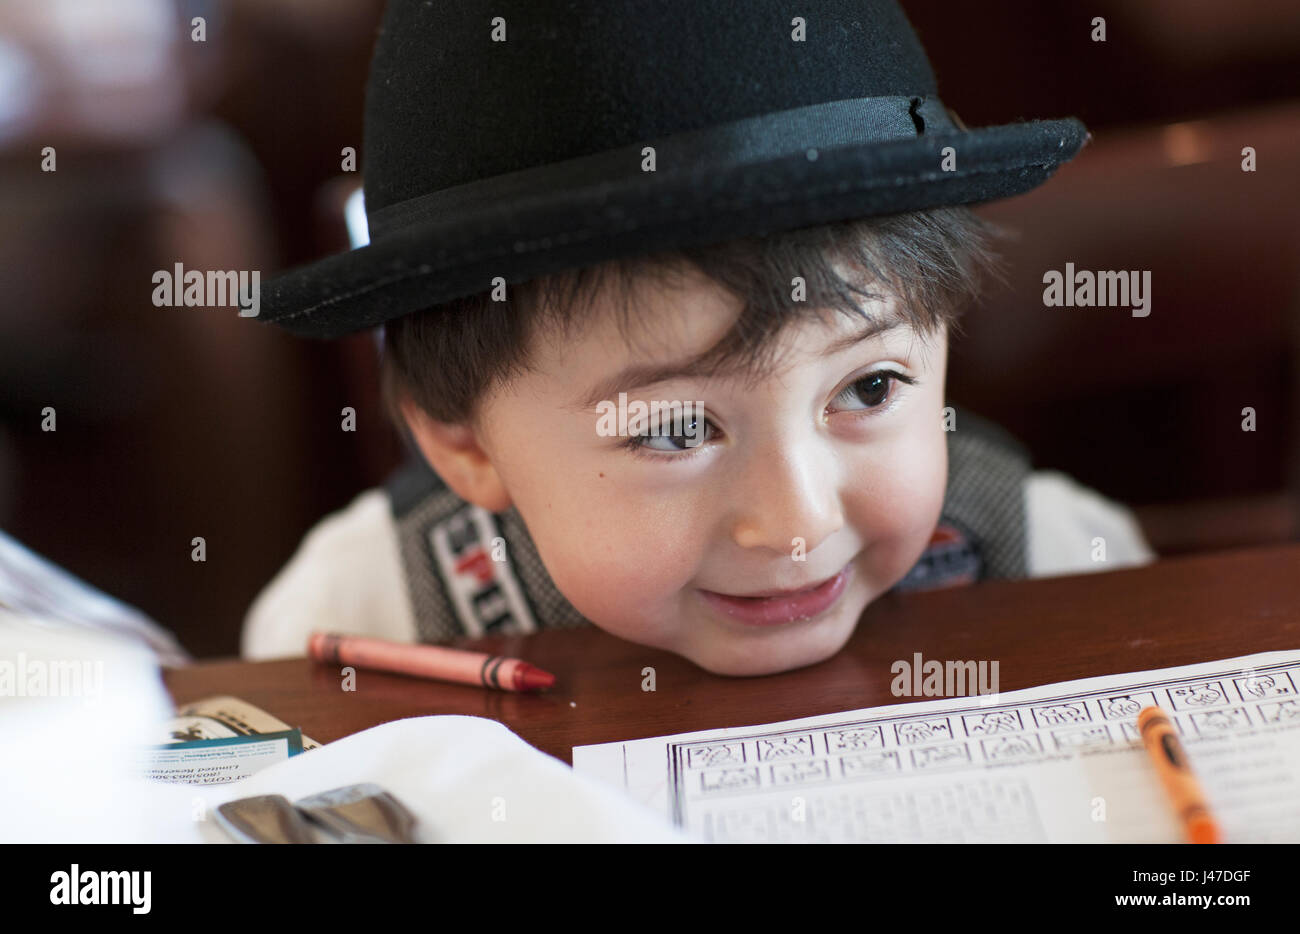 Cute little mixed race Asian Caucasian boy with chubby cheeks wearing a black fedora hat leaning his chin on a table with crayola crayons around him Stock Photo